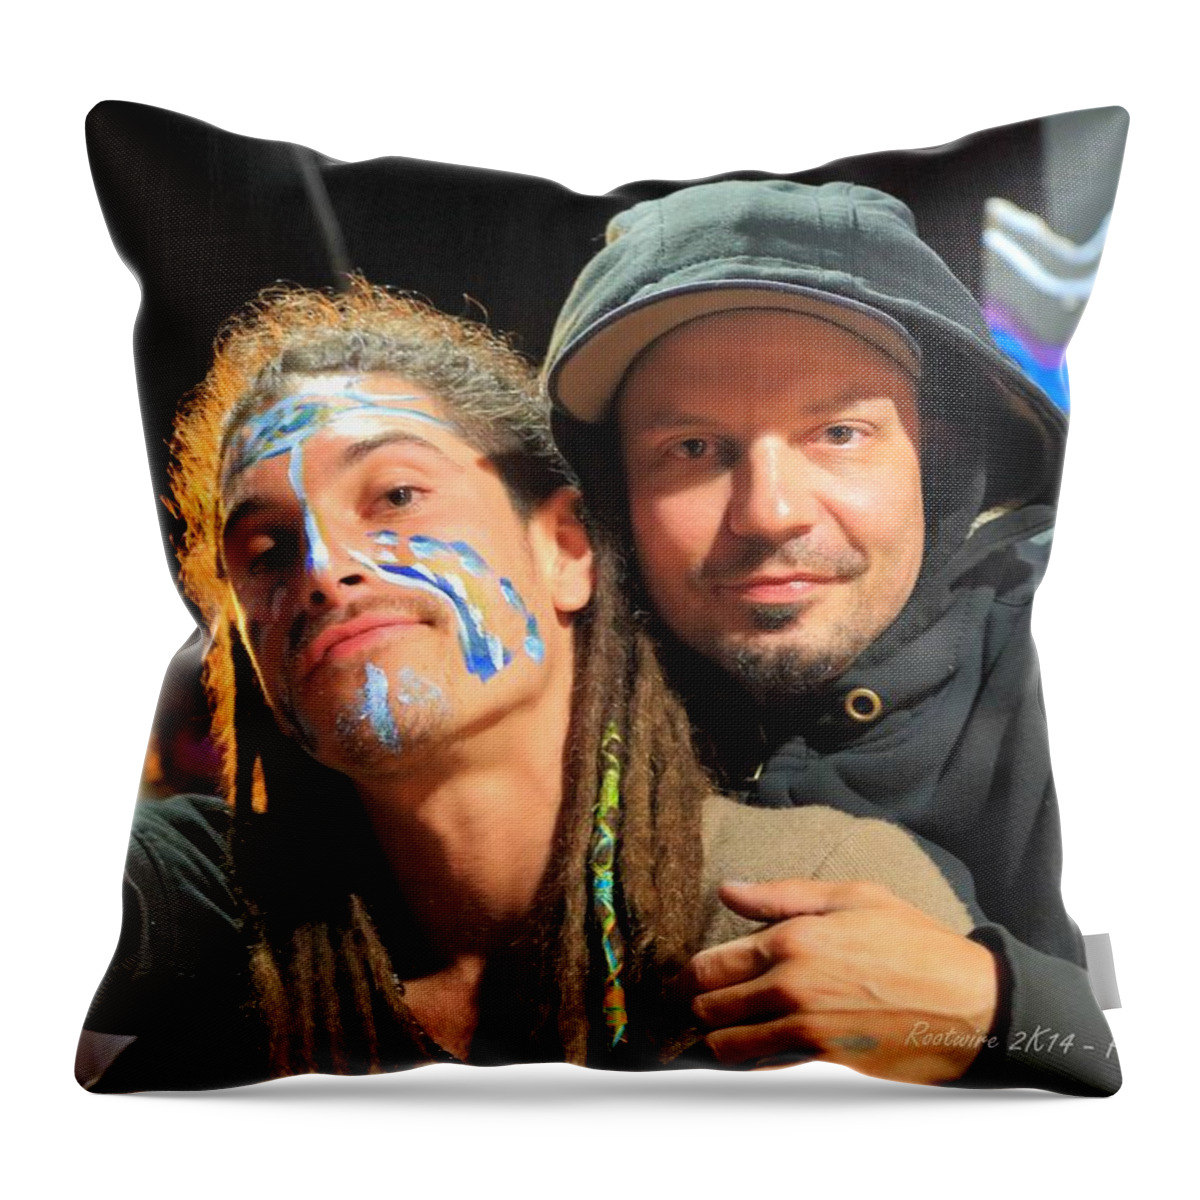 Live Artists Rw2k14 Throw Pillow featuring the photograph Live Artists RW2K14 by PJQandFriends Photography